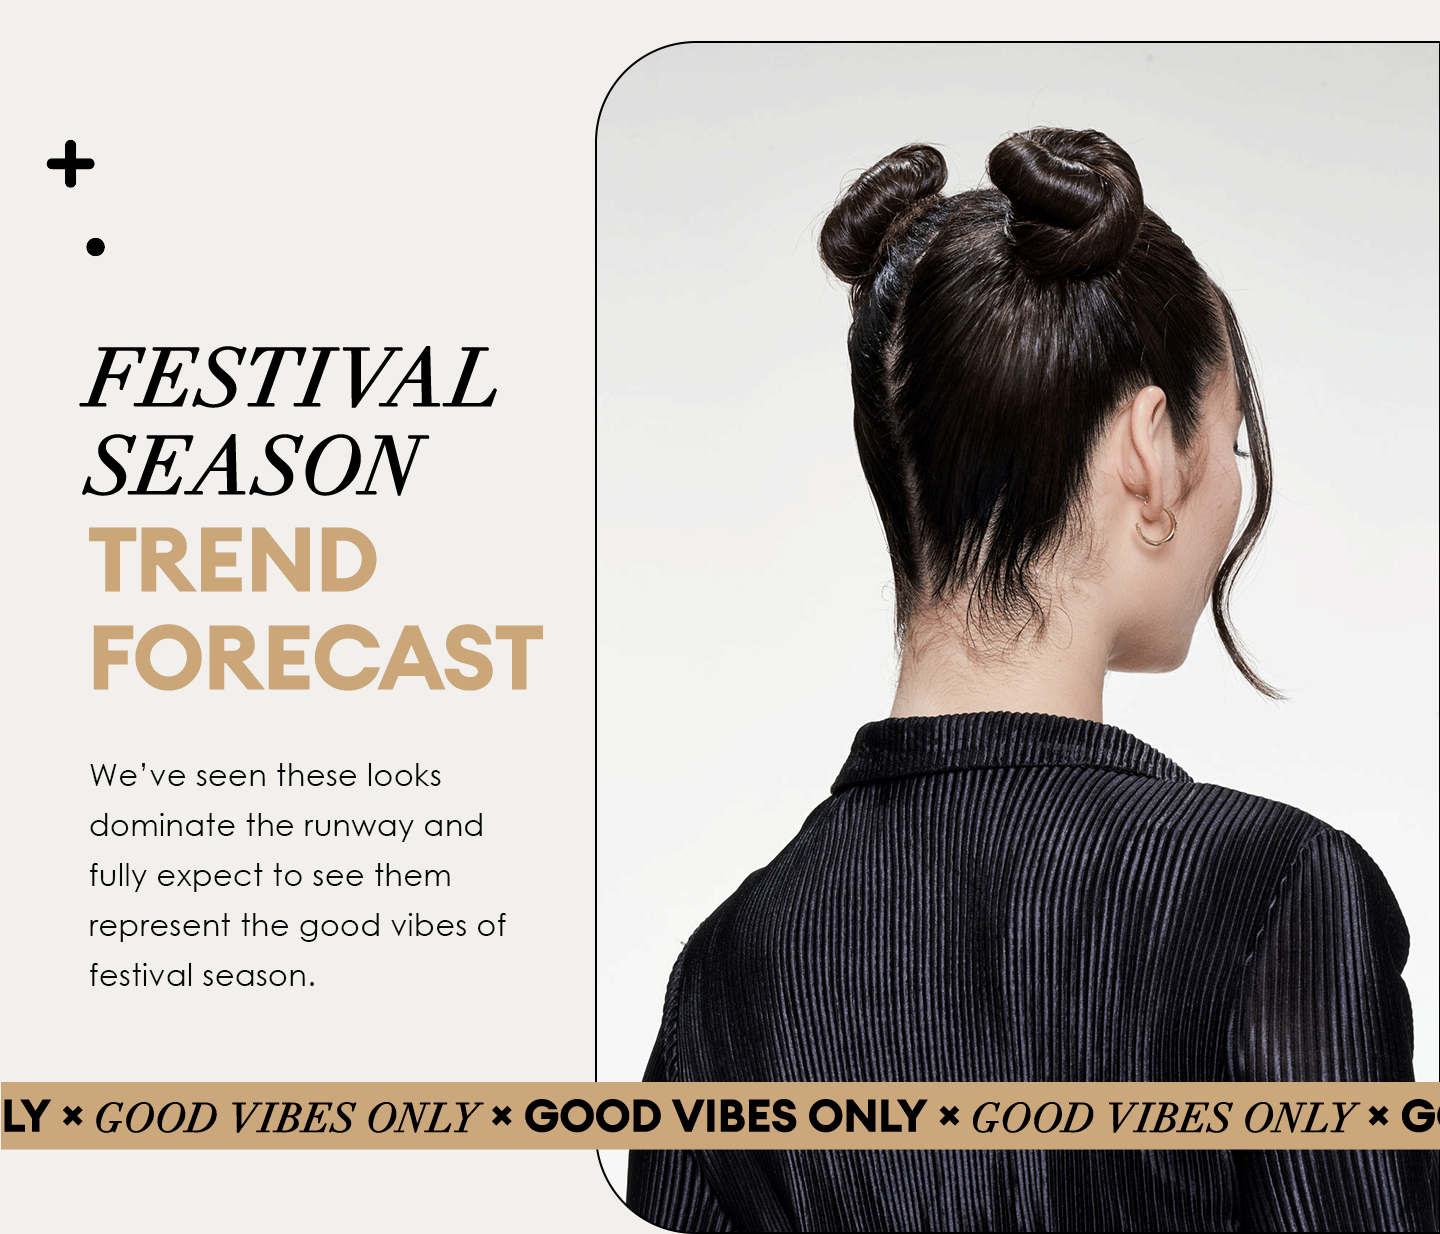 FESTIVAL SEASON TREND FORECAST | Weve seen these looks dominate the runway and fully expect to see them represent the good vibes of festival season. | GOOD VIBES ONLY